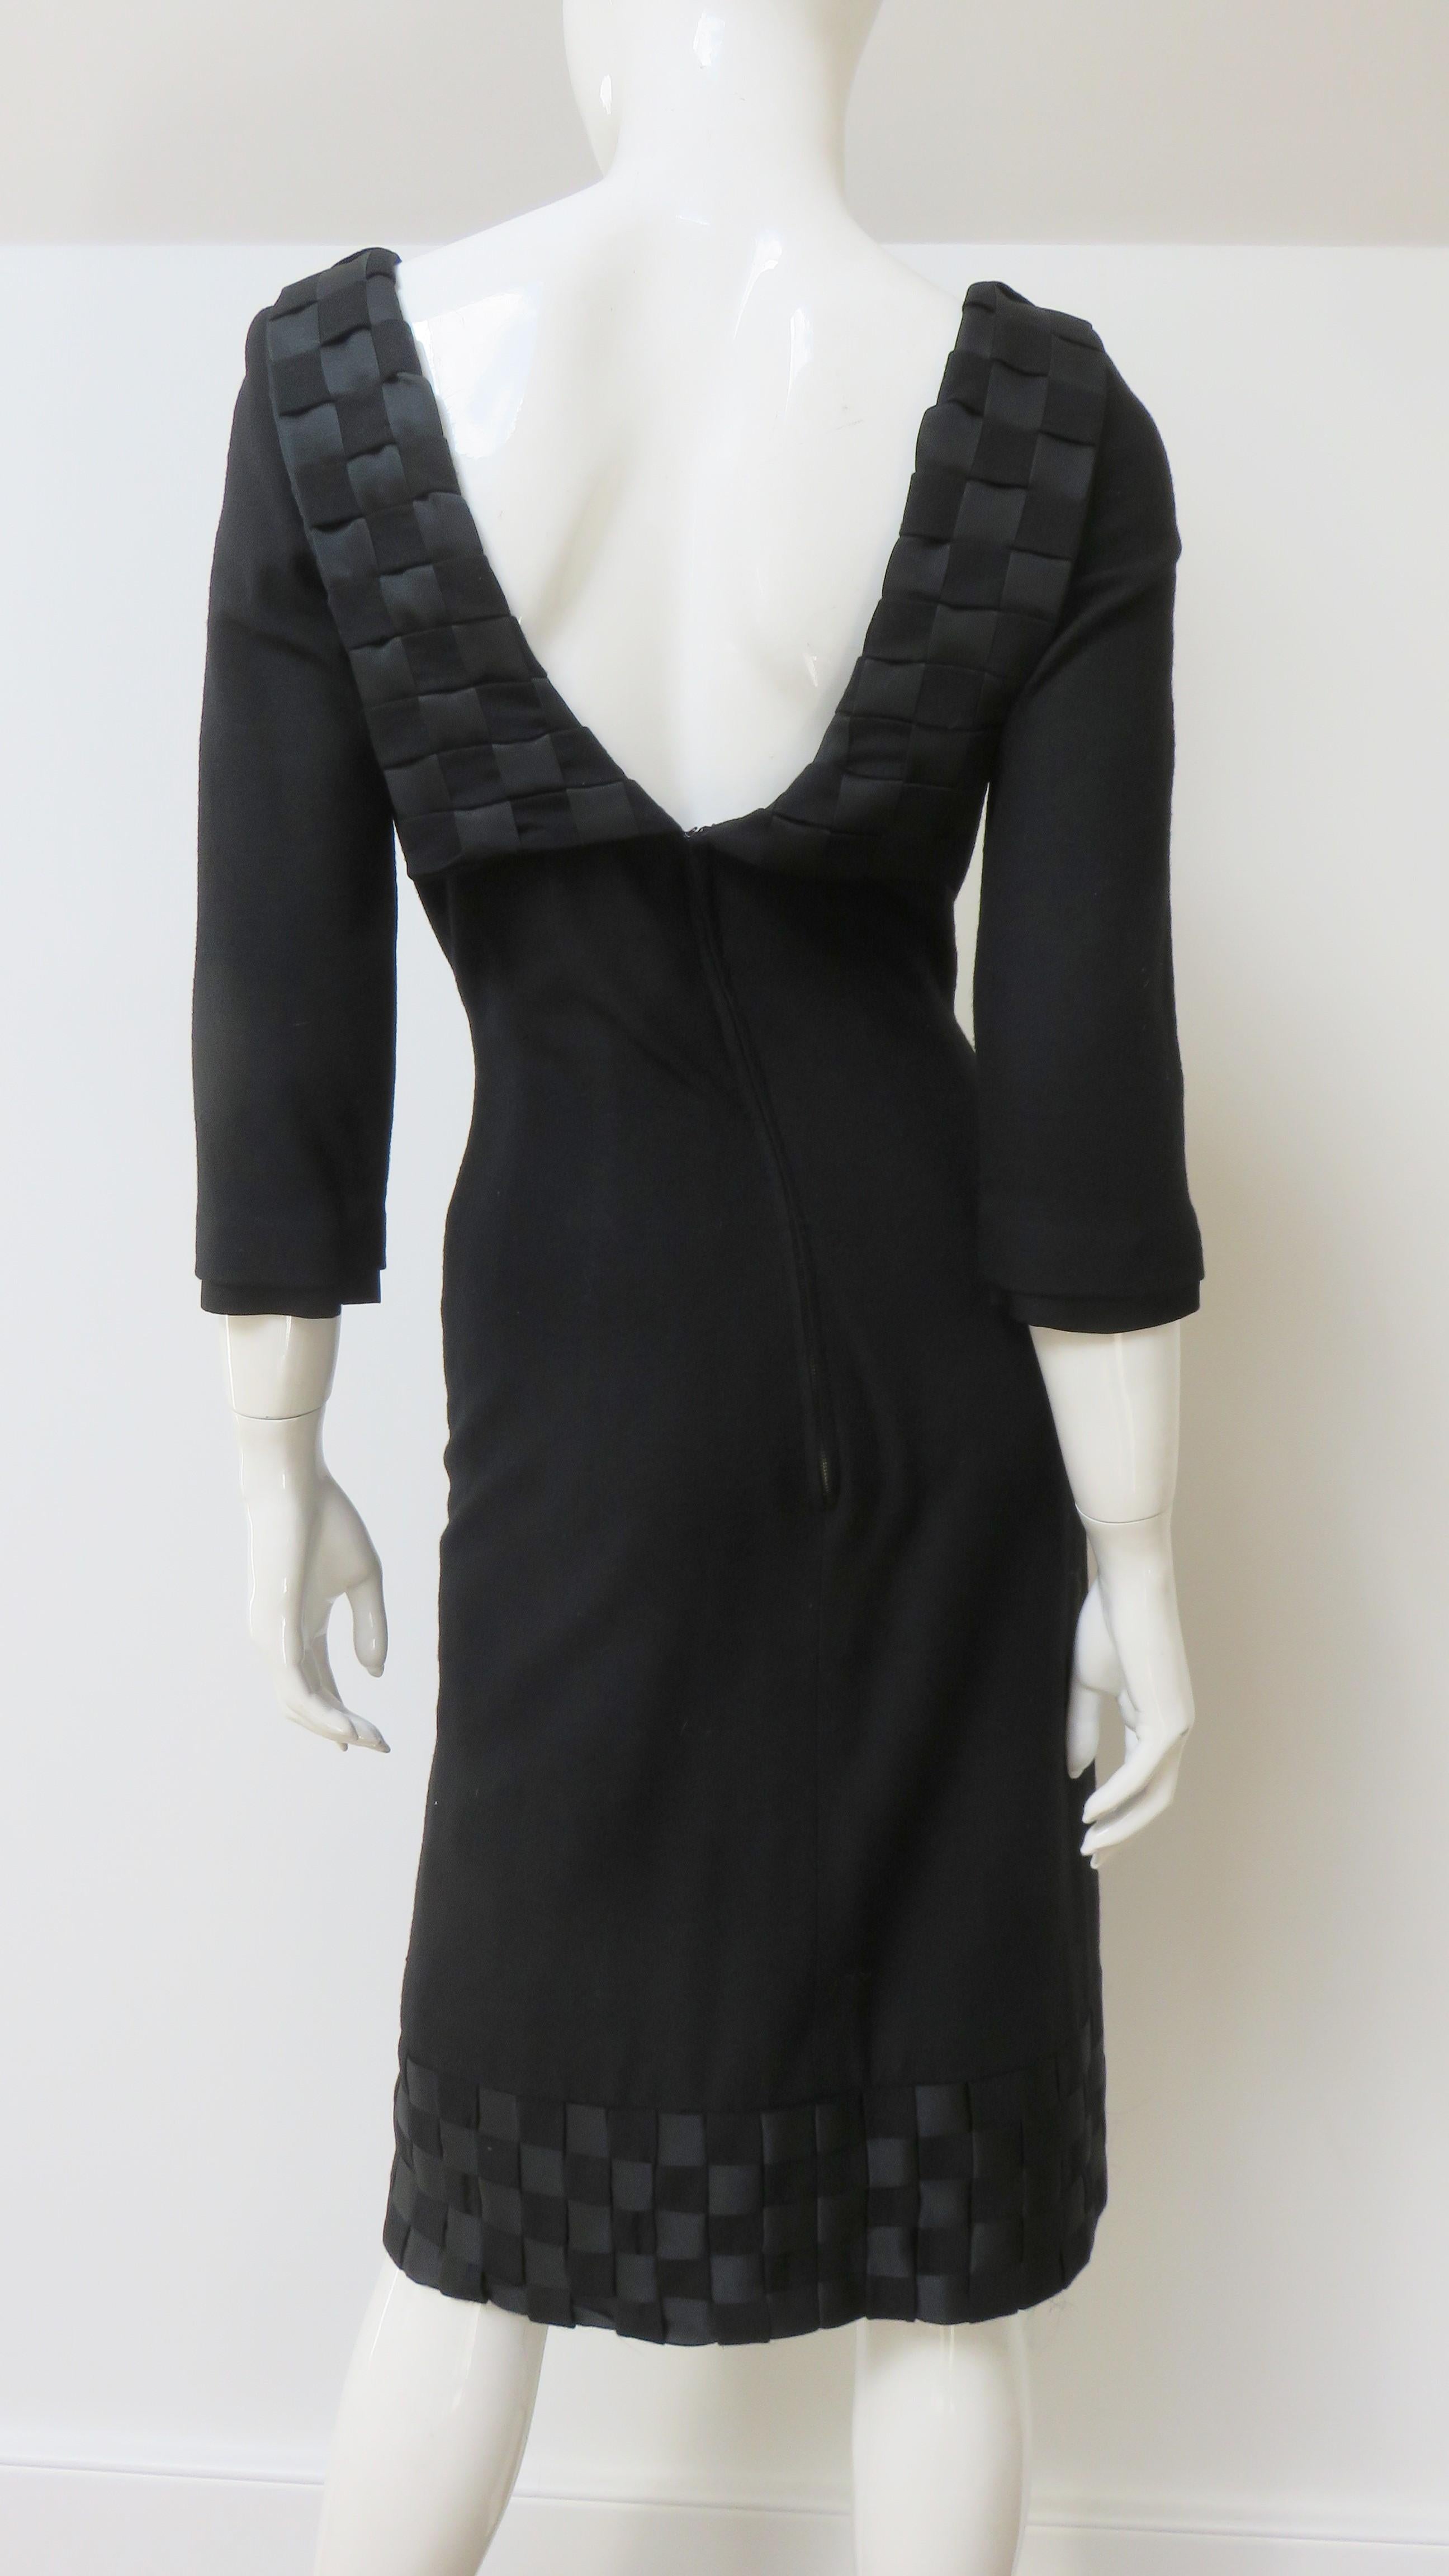 Mr Blackwell Woven Hem and Collar 1950s Dress For Sale 7